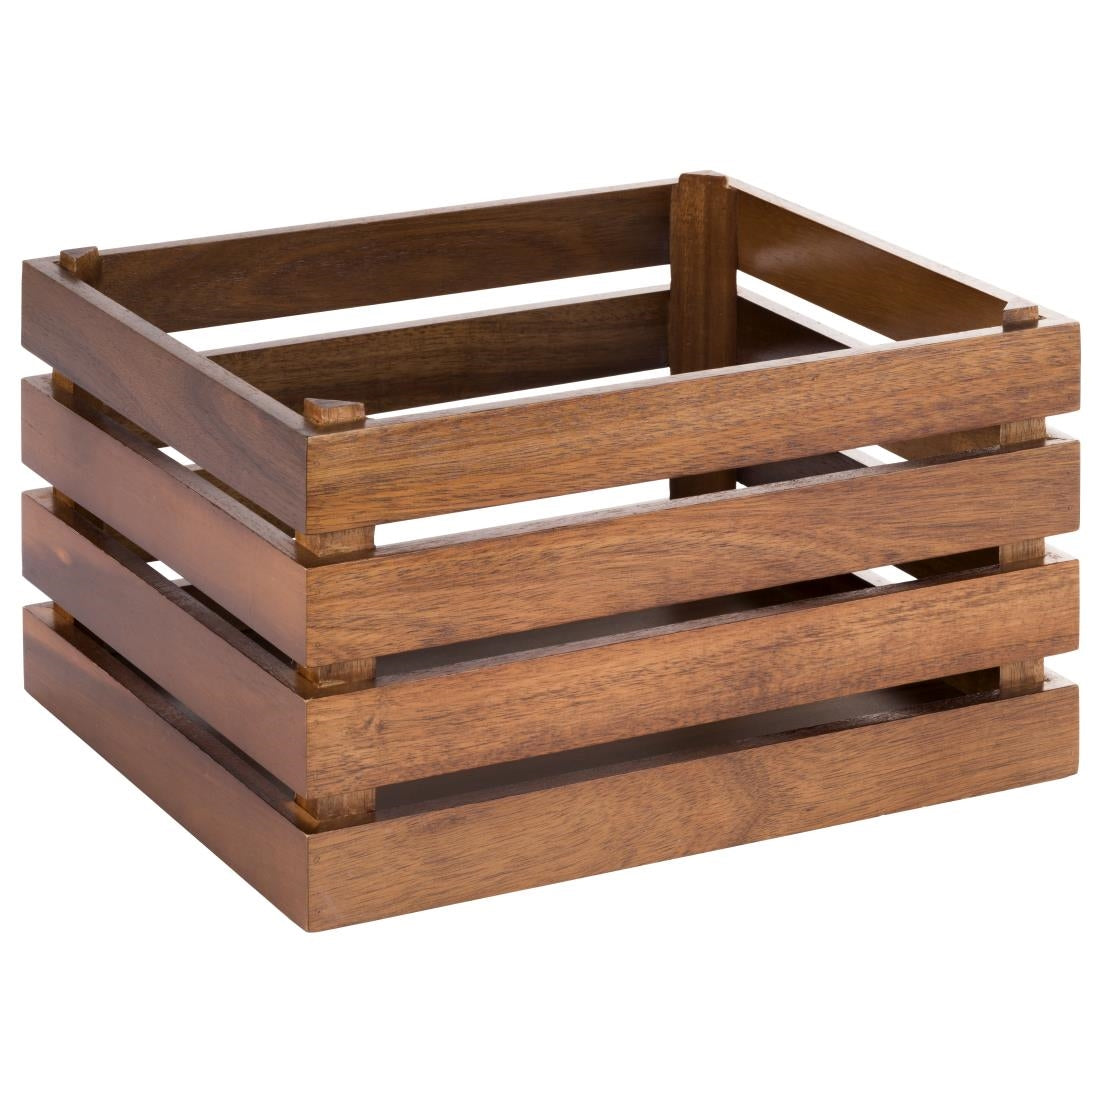 FT150 APS Superbox Natural Acacia Wooden Crate 350 x 290mm JD Catering Equipment Solutions Ltd